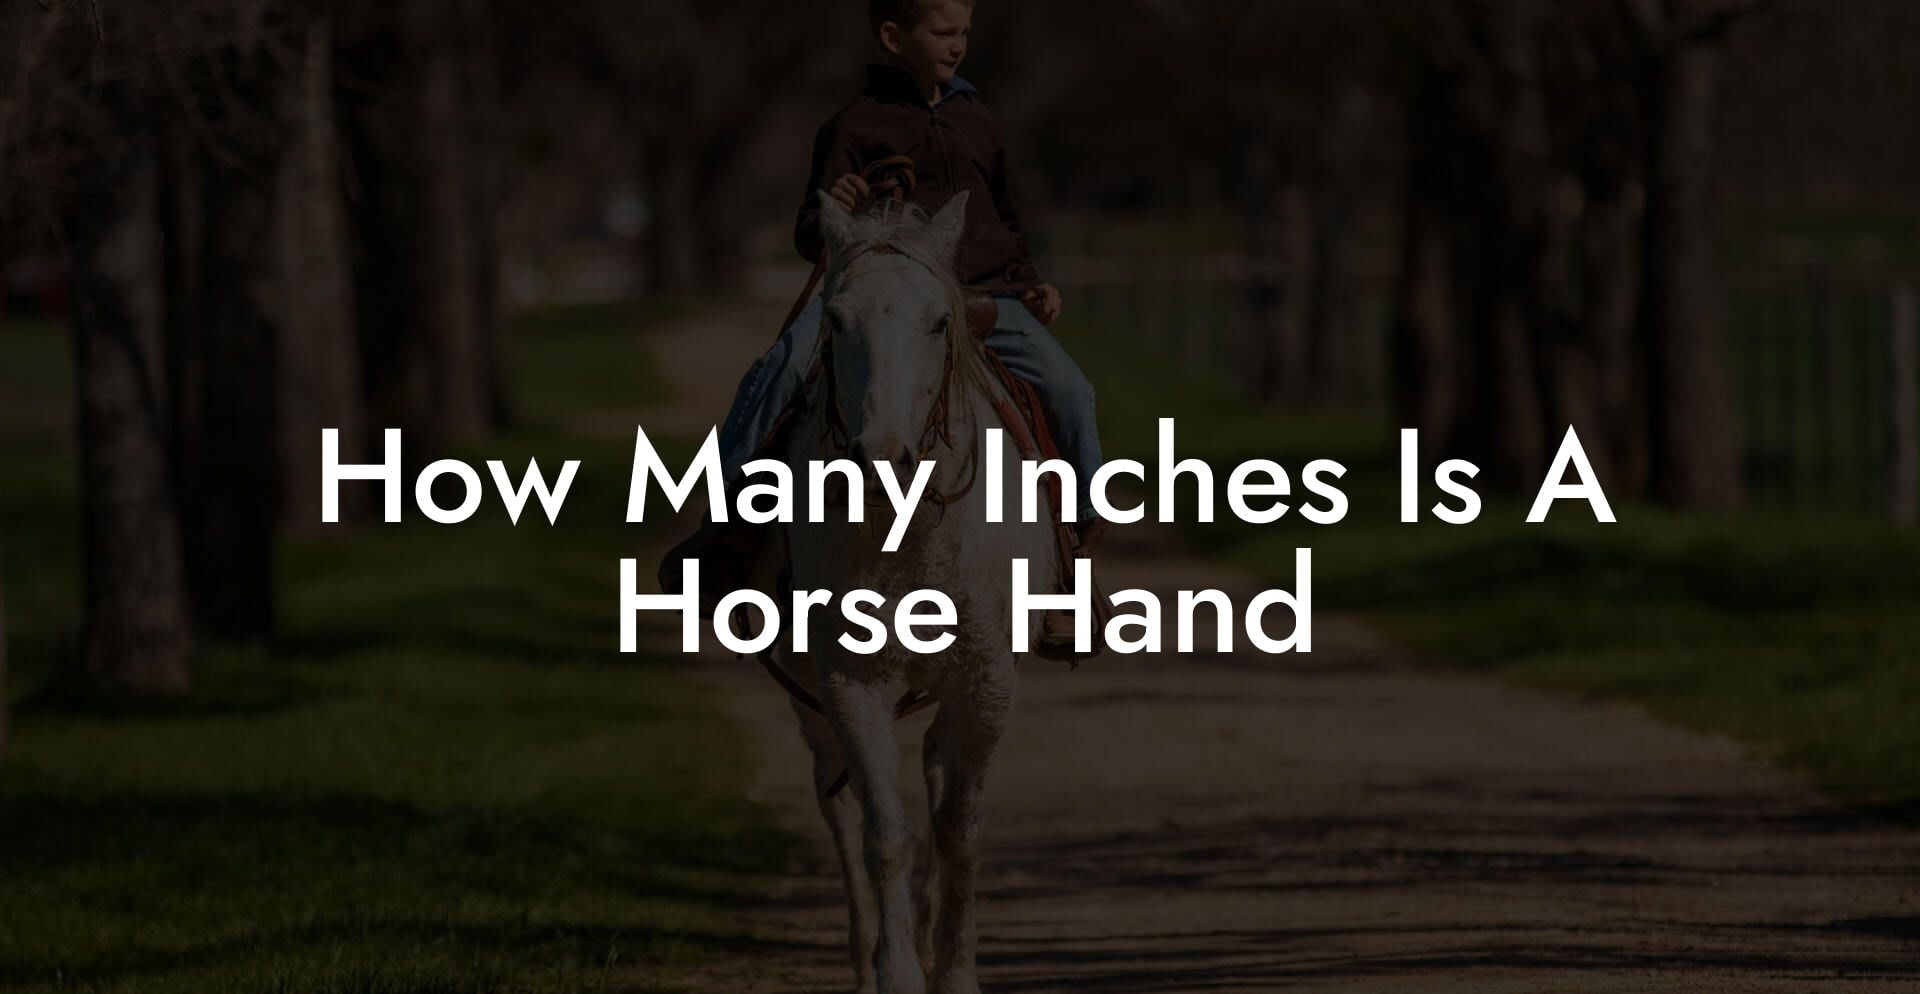 How Many Inches Is A Horse Hand